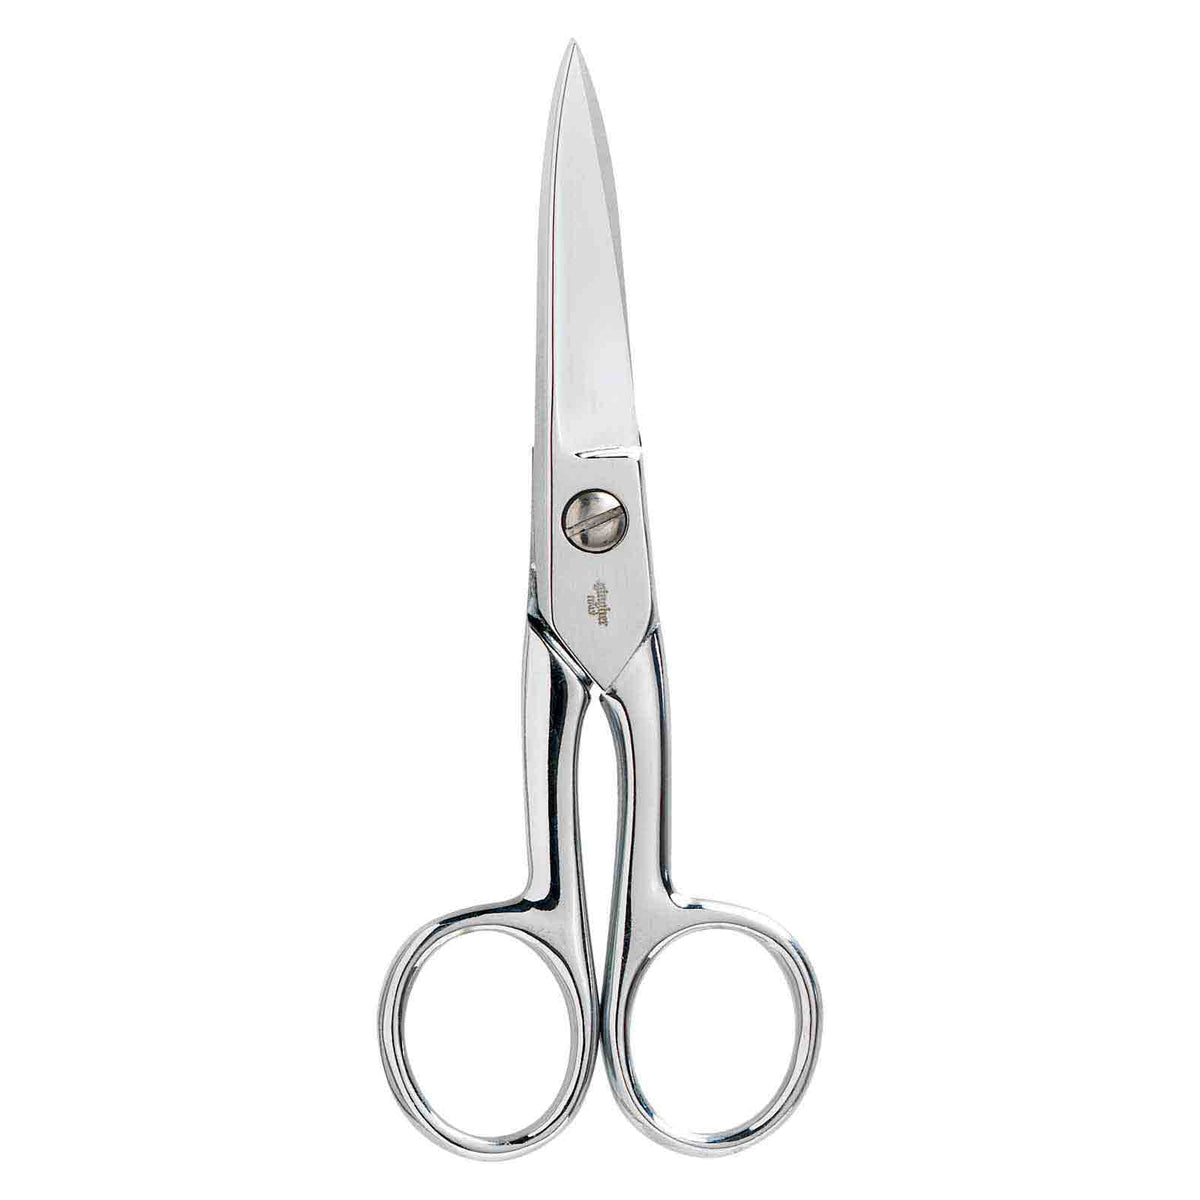 Gringher Heavy Duty Chrome Plated Scissors with Rounded Tips